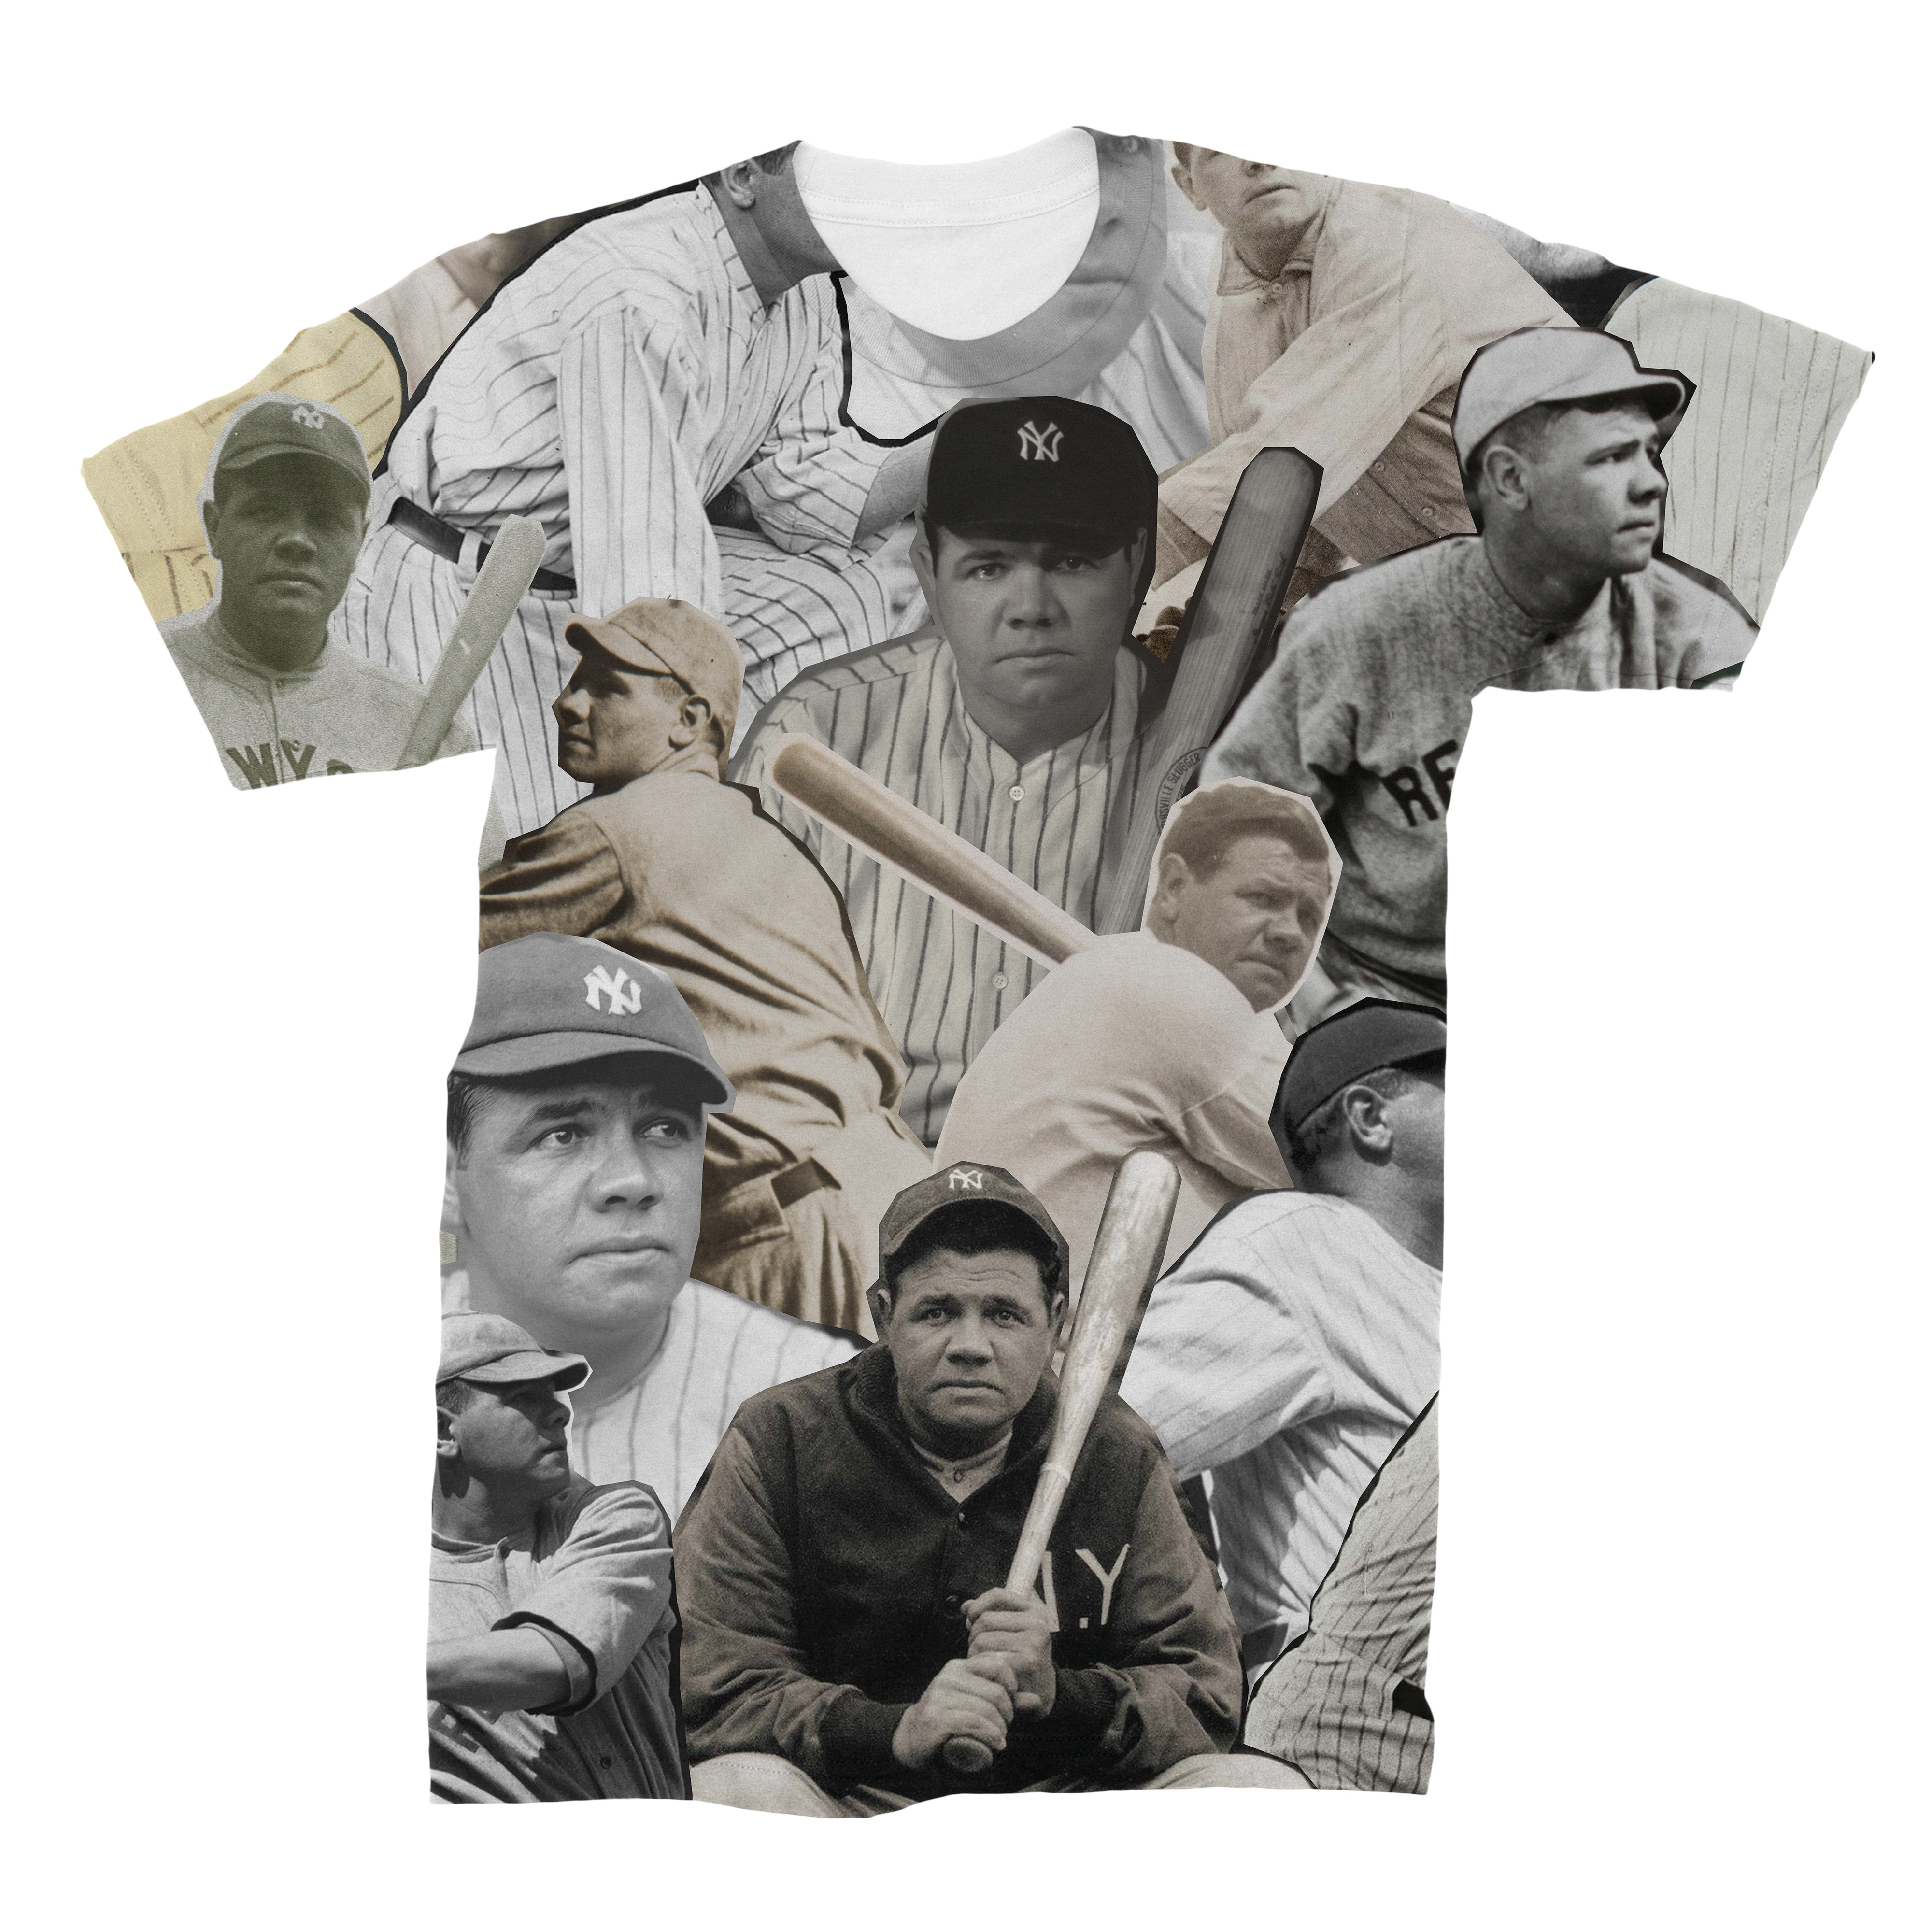 Babe Ruth and the Gang